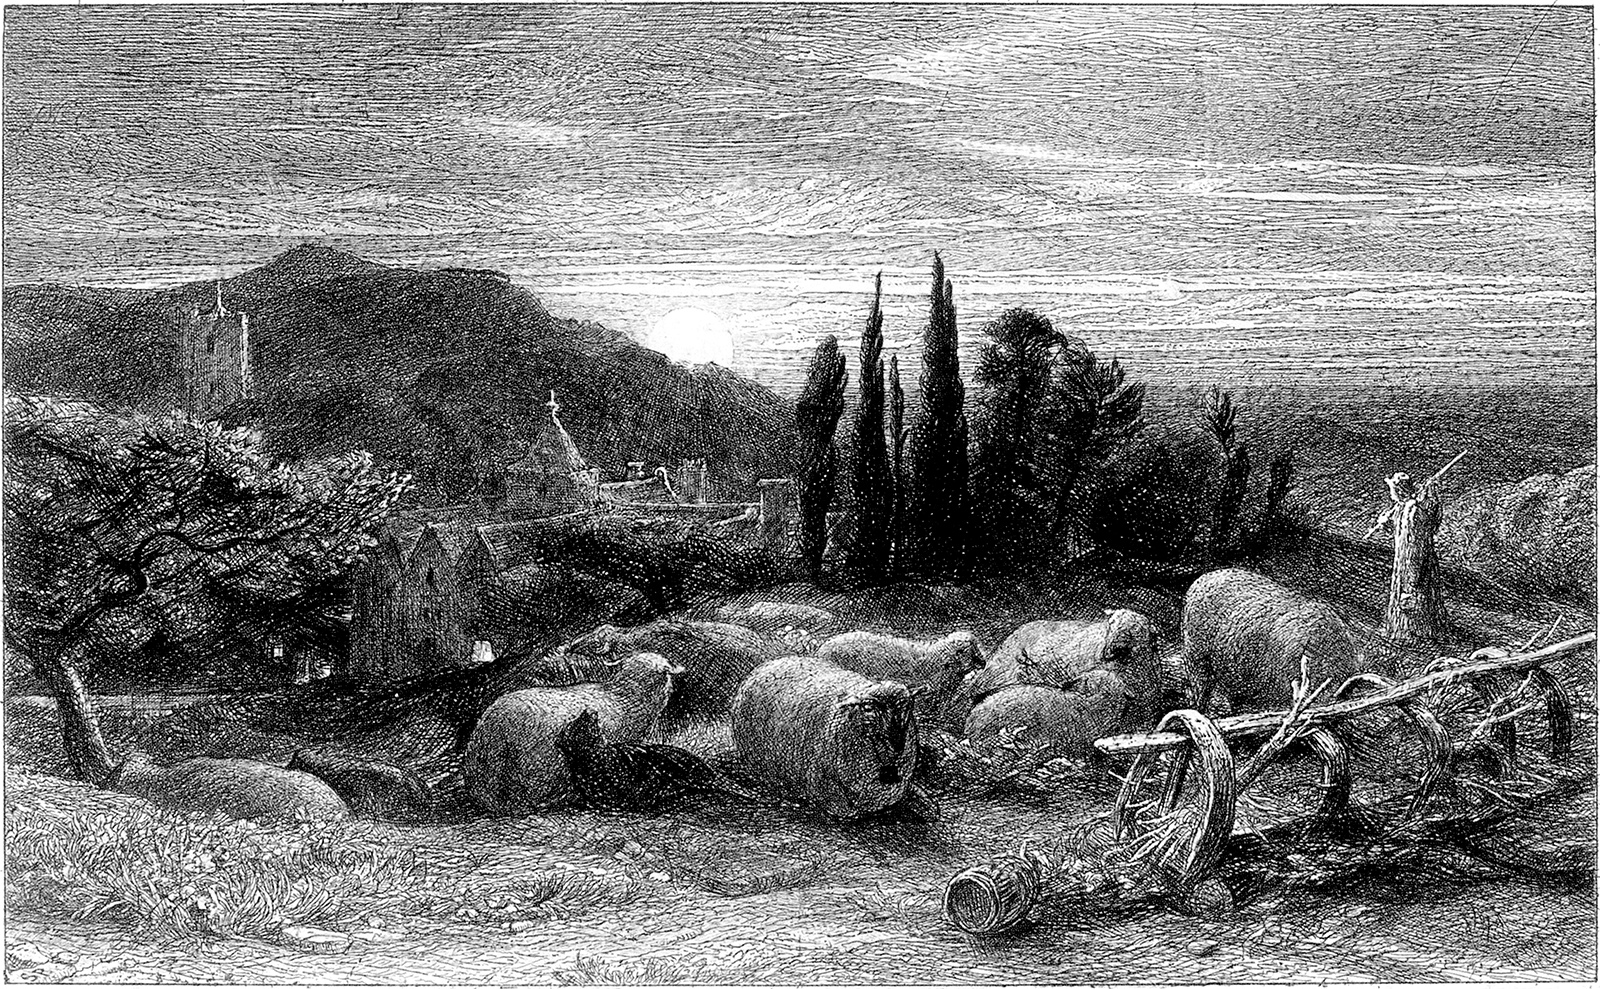 ‘The Rising Moon, or an English Pastoral’; etching by Samuel Palmer, 1855